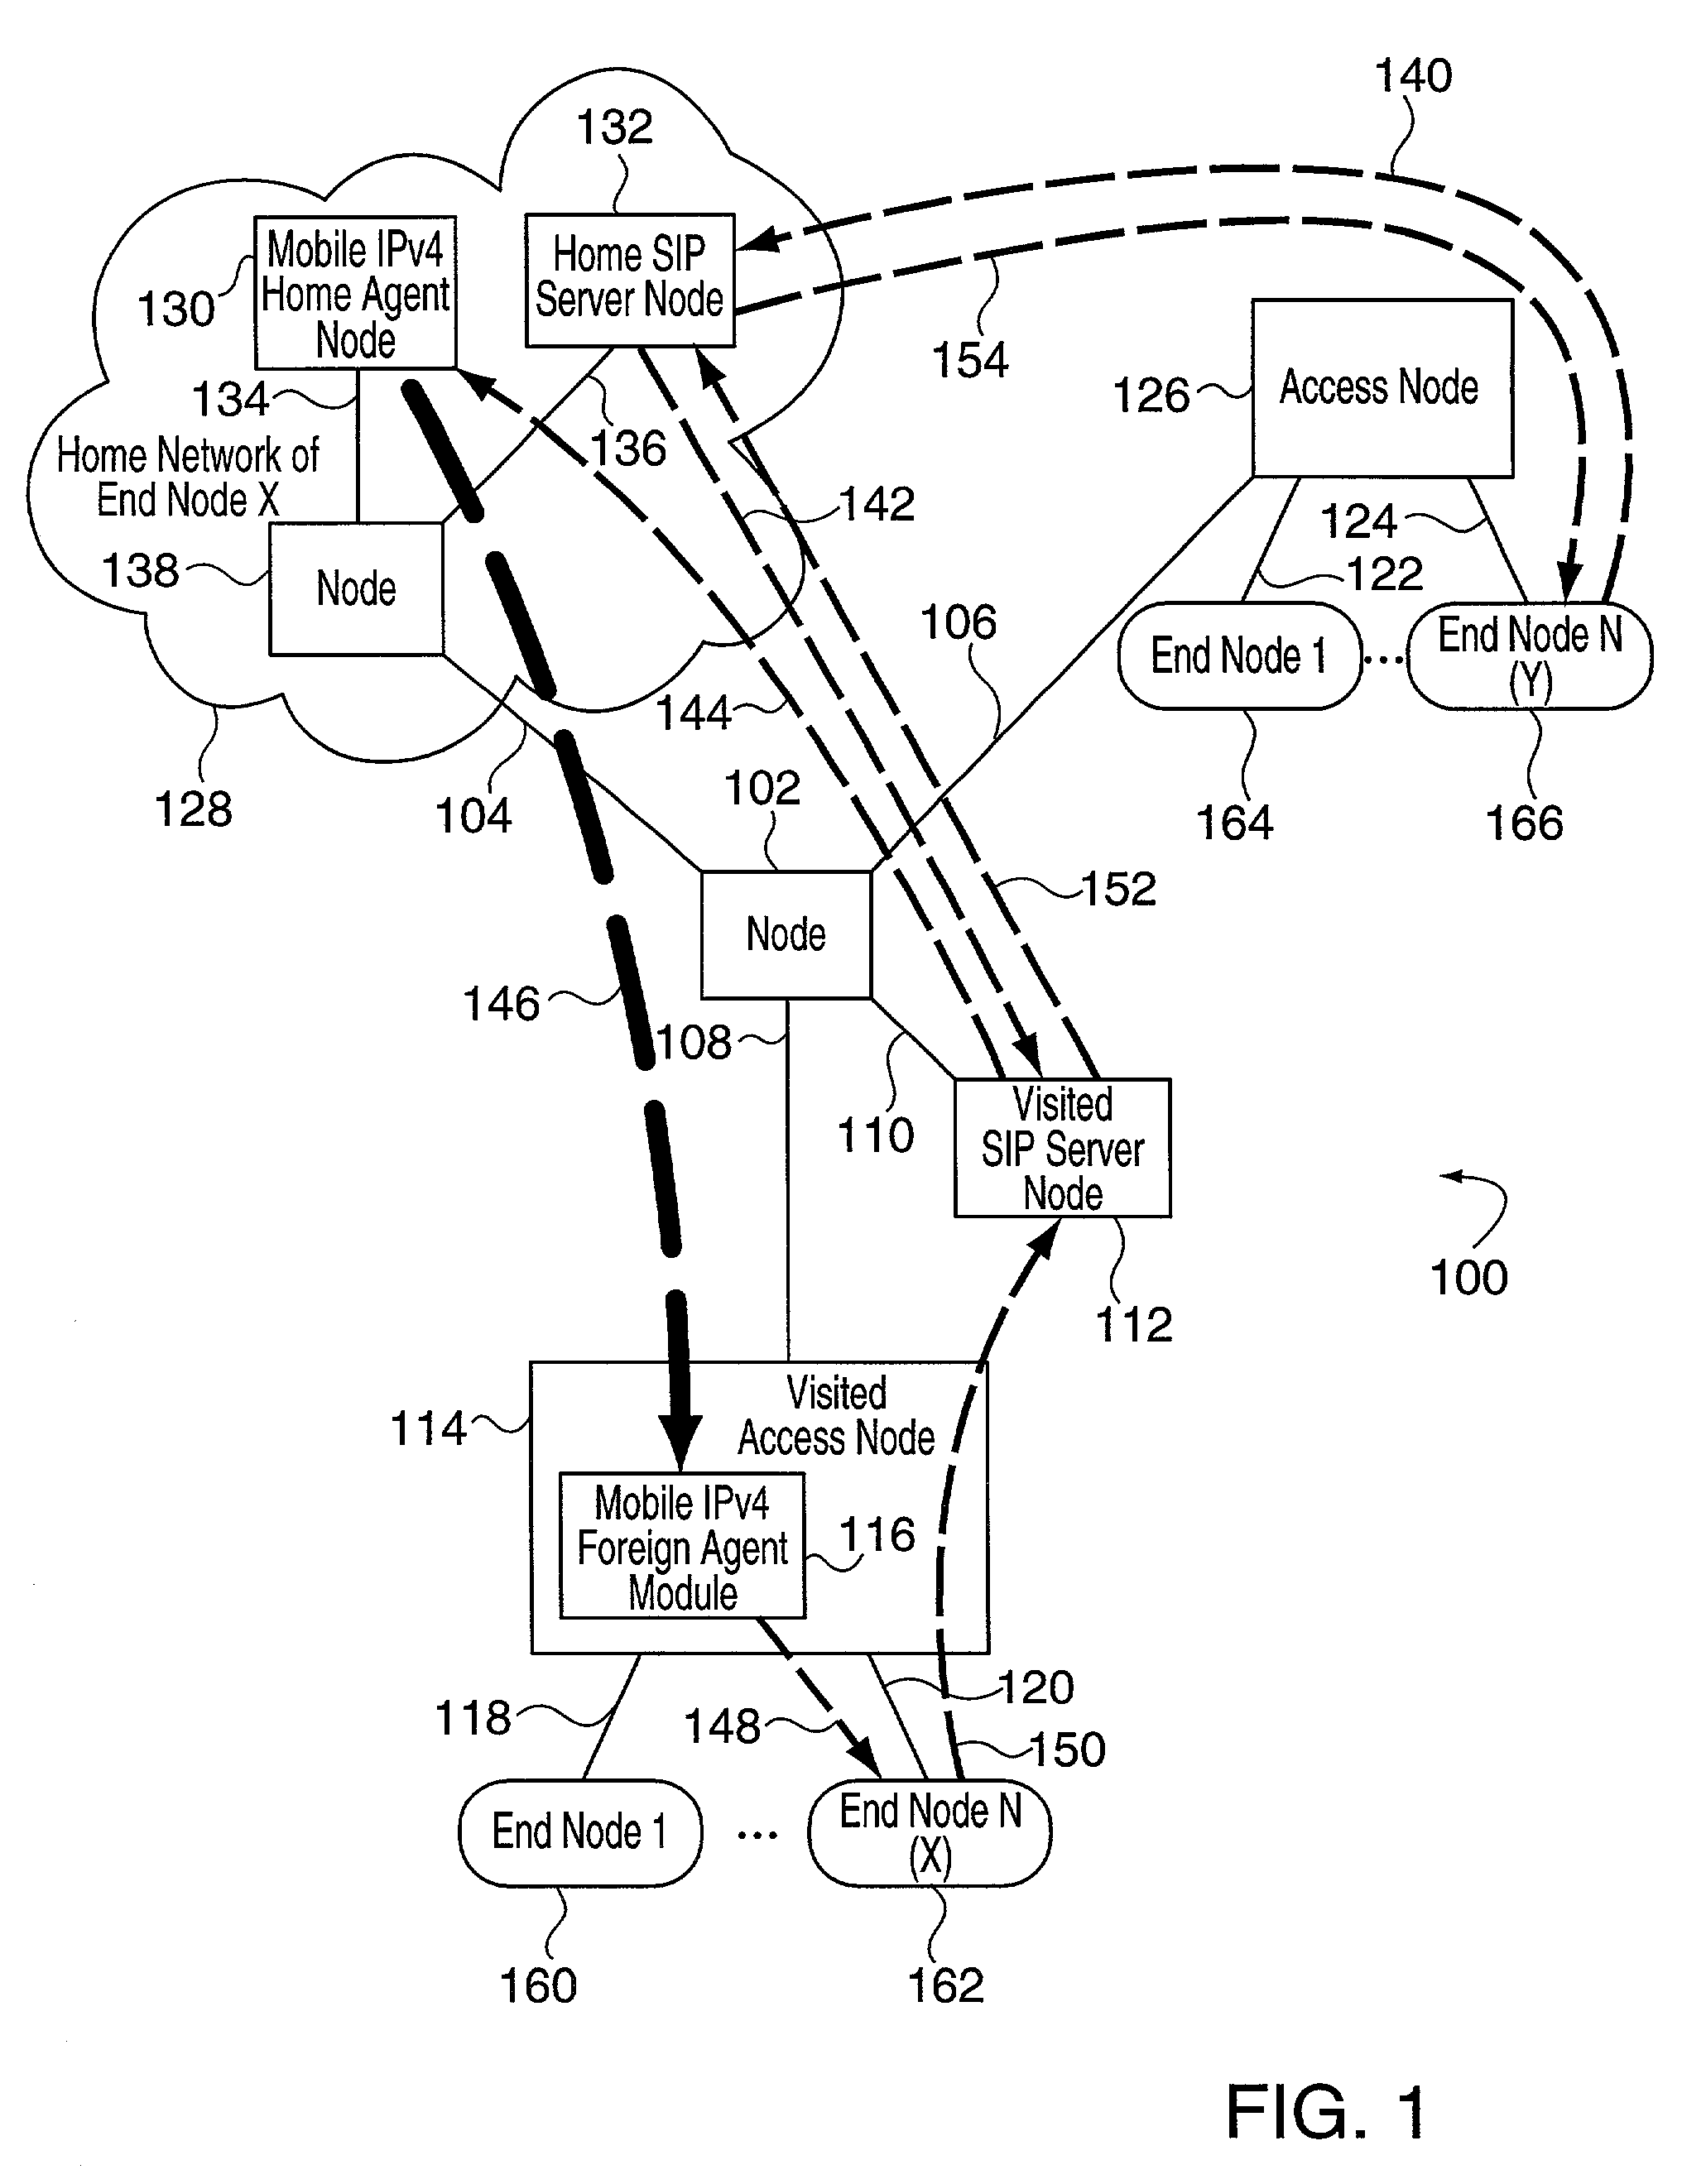 Methods and apparatus for supporting session signaling and mobility management in a communications system